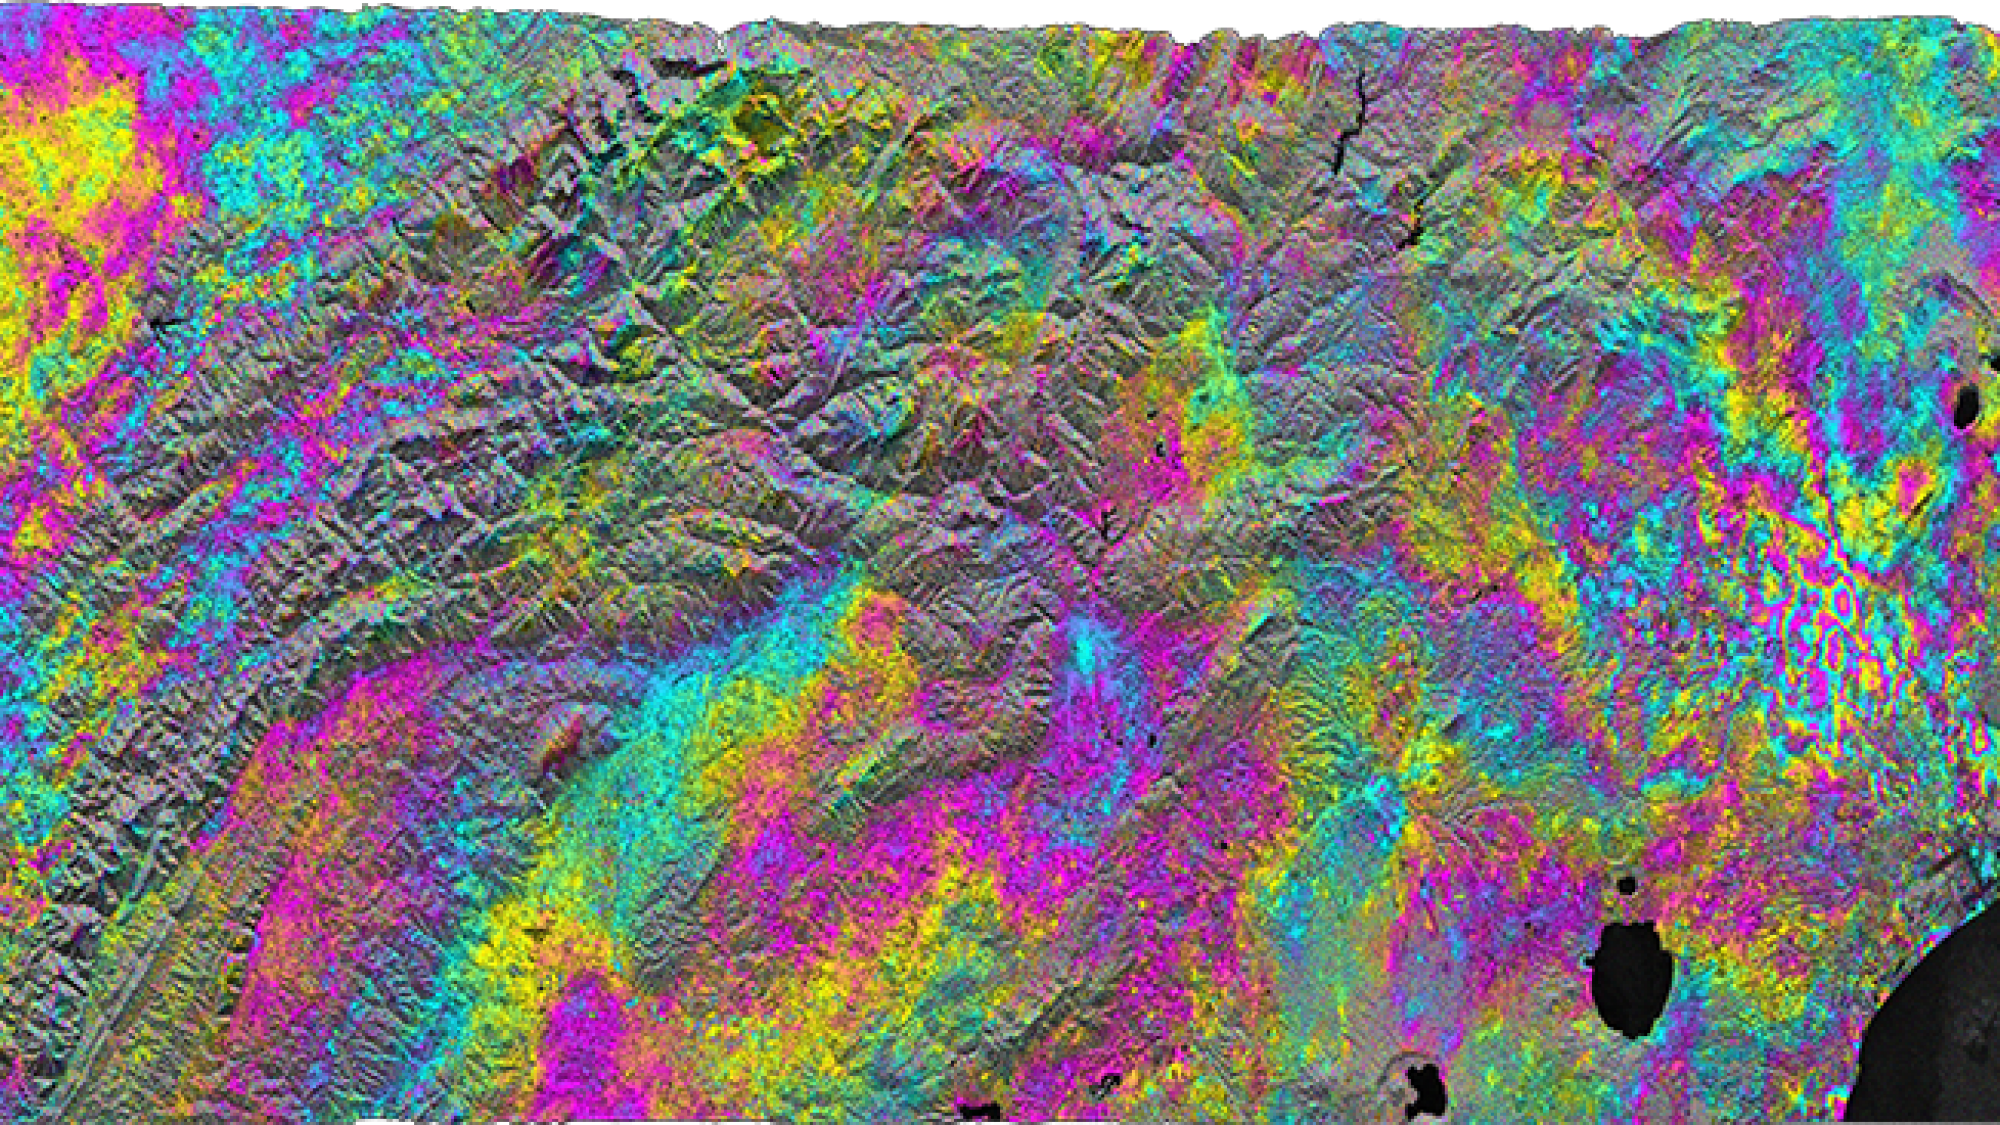 Deformation in the Carlsbad, New Mexico, region is revealed in this Sentinel-1 InSAR beta image. Created through the collaborative Getting Ready for NISAR project with JPL, this image is one of many available through either ASF DAAC’s Vertex or NASA’s Earthdata Search. See the full article for more about the project, available products, and how to offer feedback. Image credit: ASF DAAC & JPL 2017, contains modified Copernicus Sentinel data 2017.